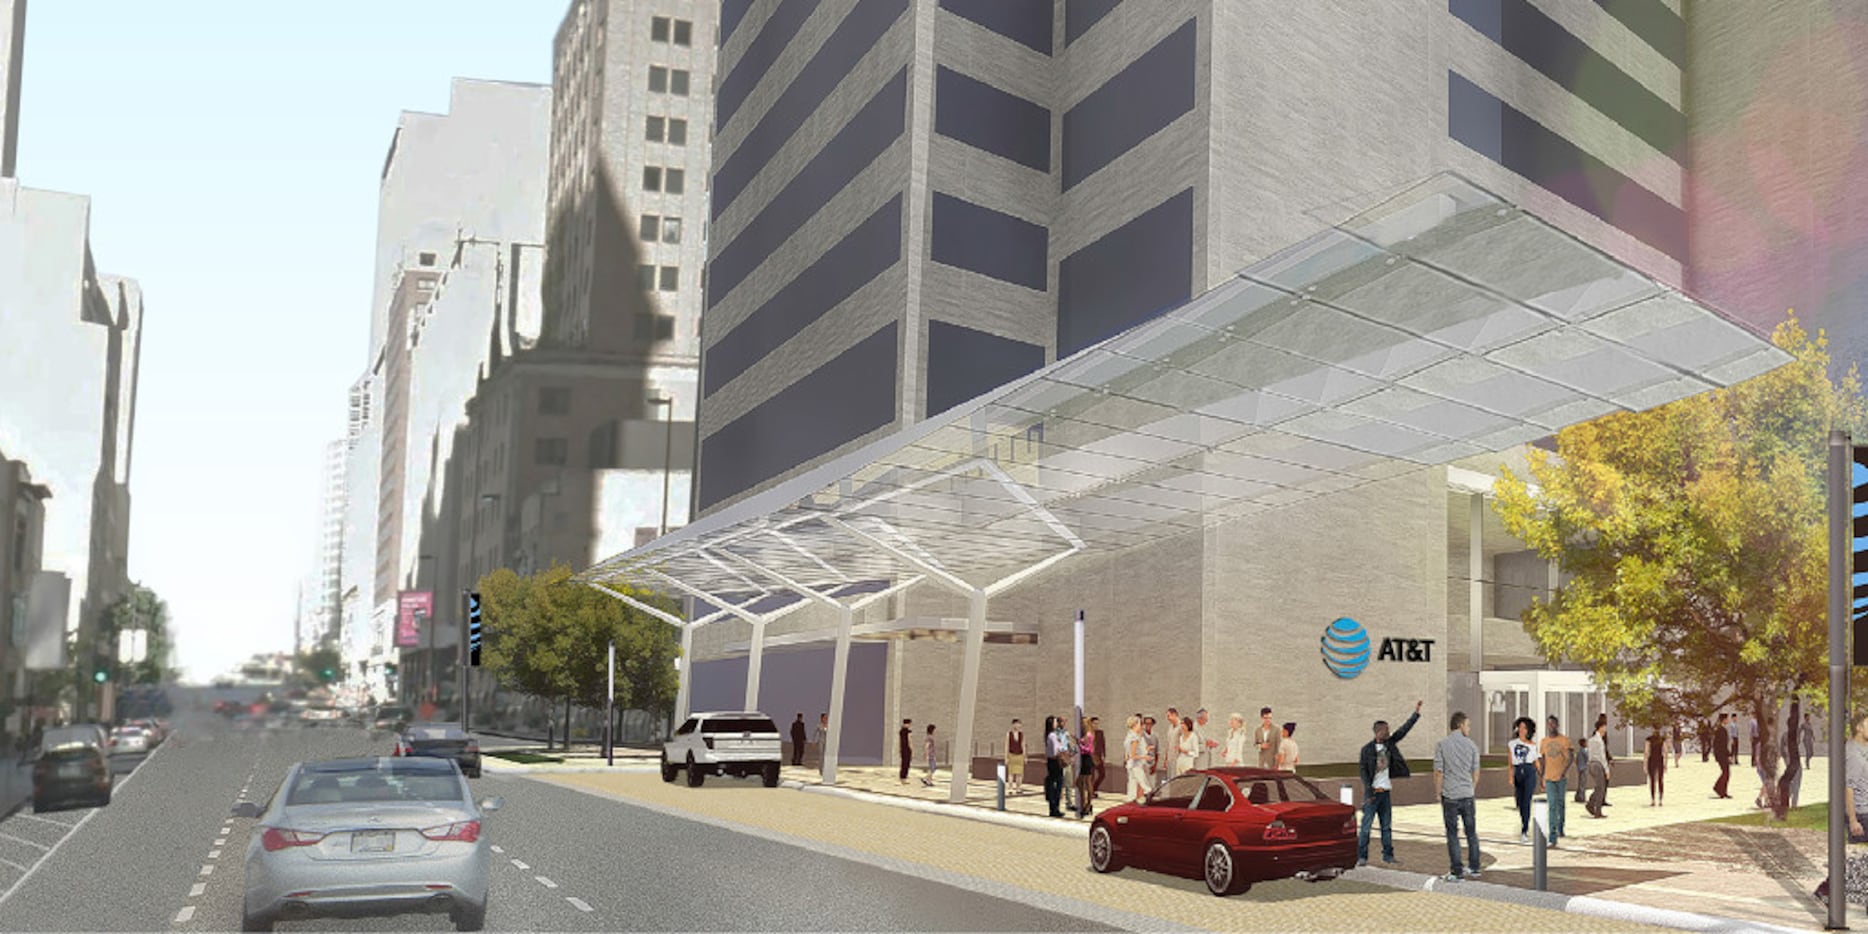 The new-look Commerce Street, per AT&T's request